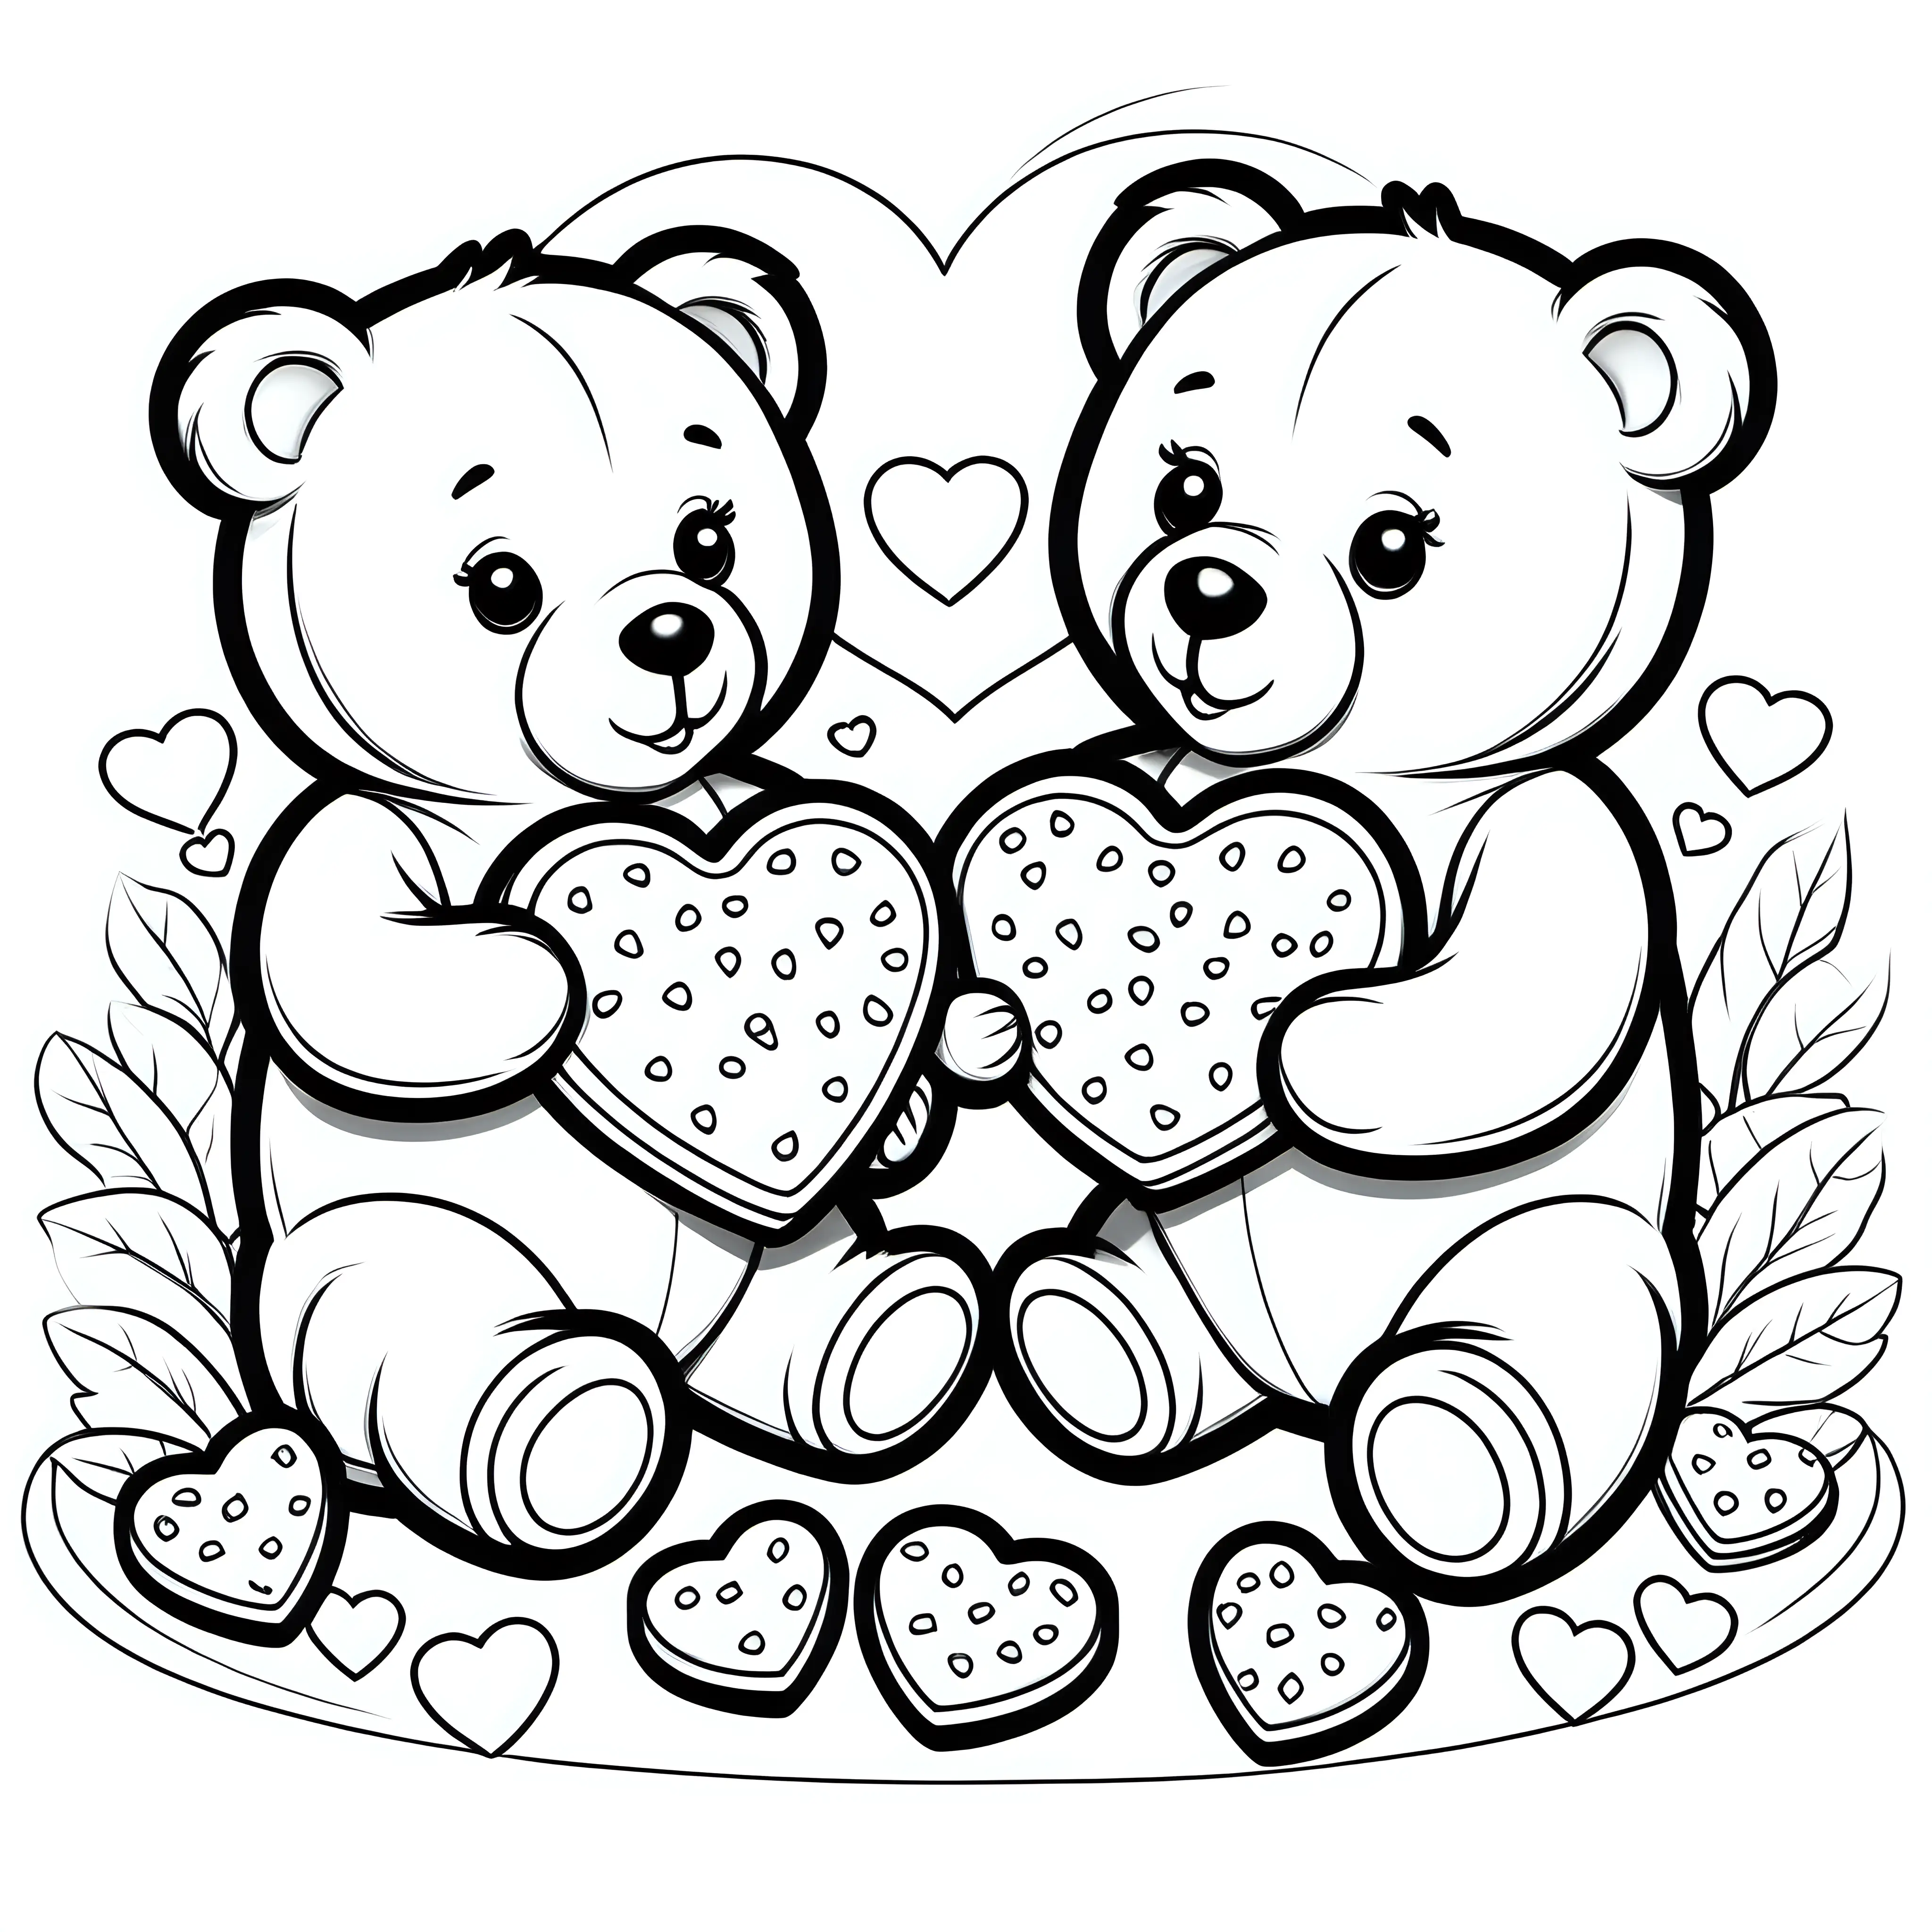 create a black line illustration with a white background. for children's coloring book of two cute teddy bears eating heart shaped cookies. Use crisp black outlines, no shading. NO Color. 